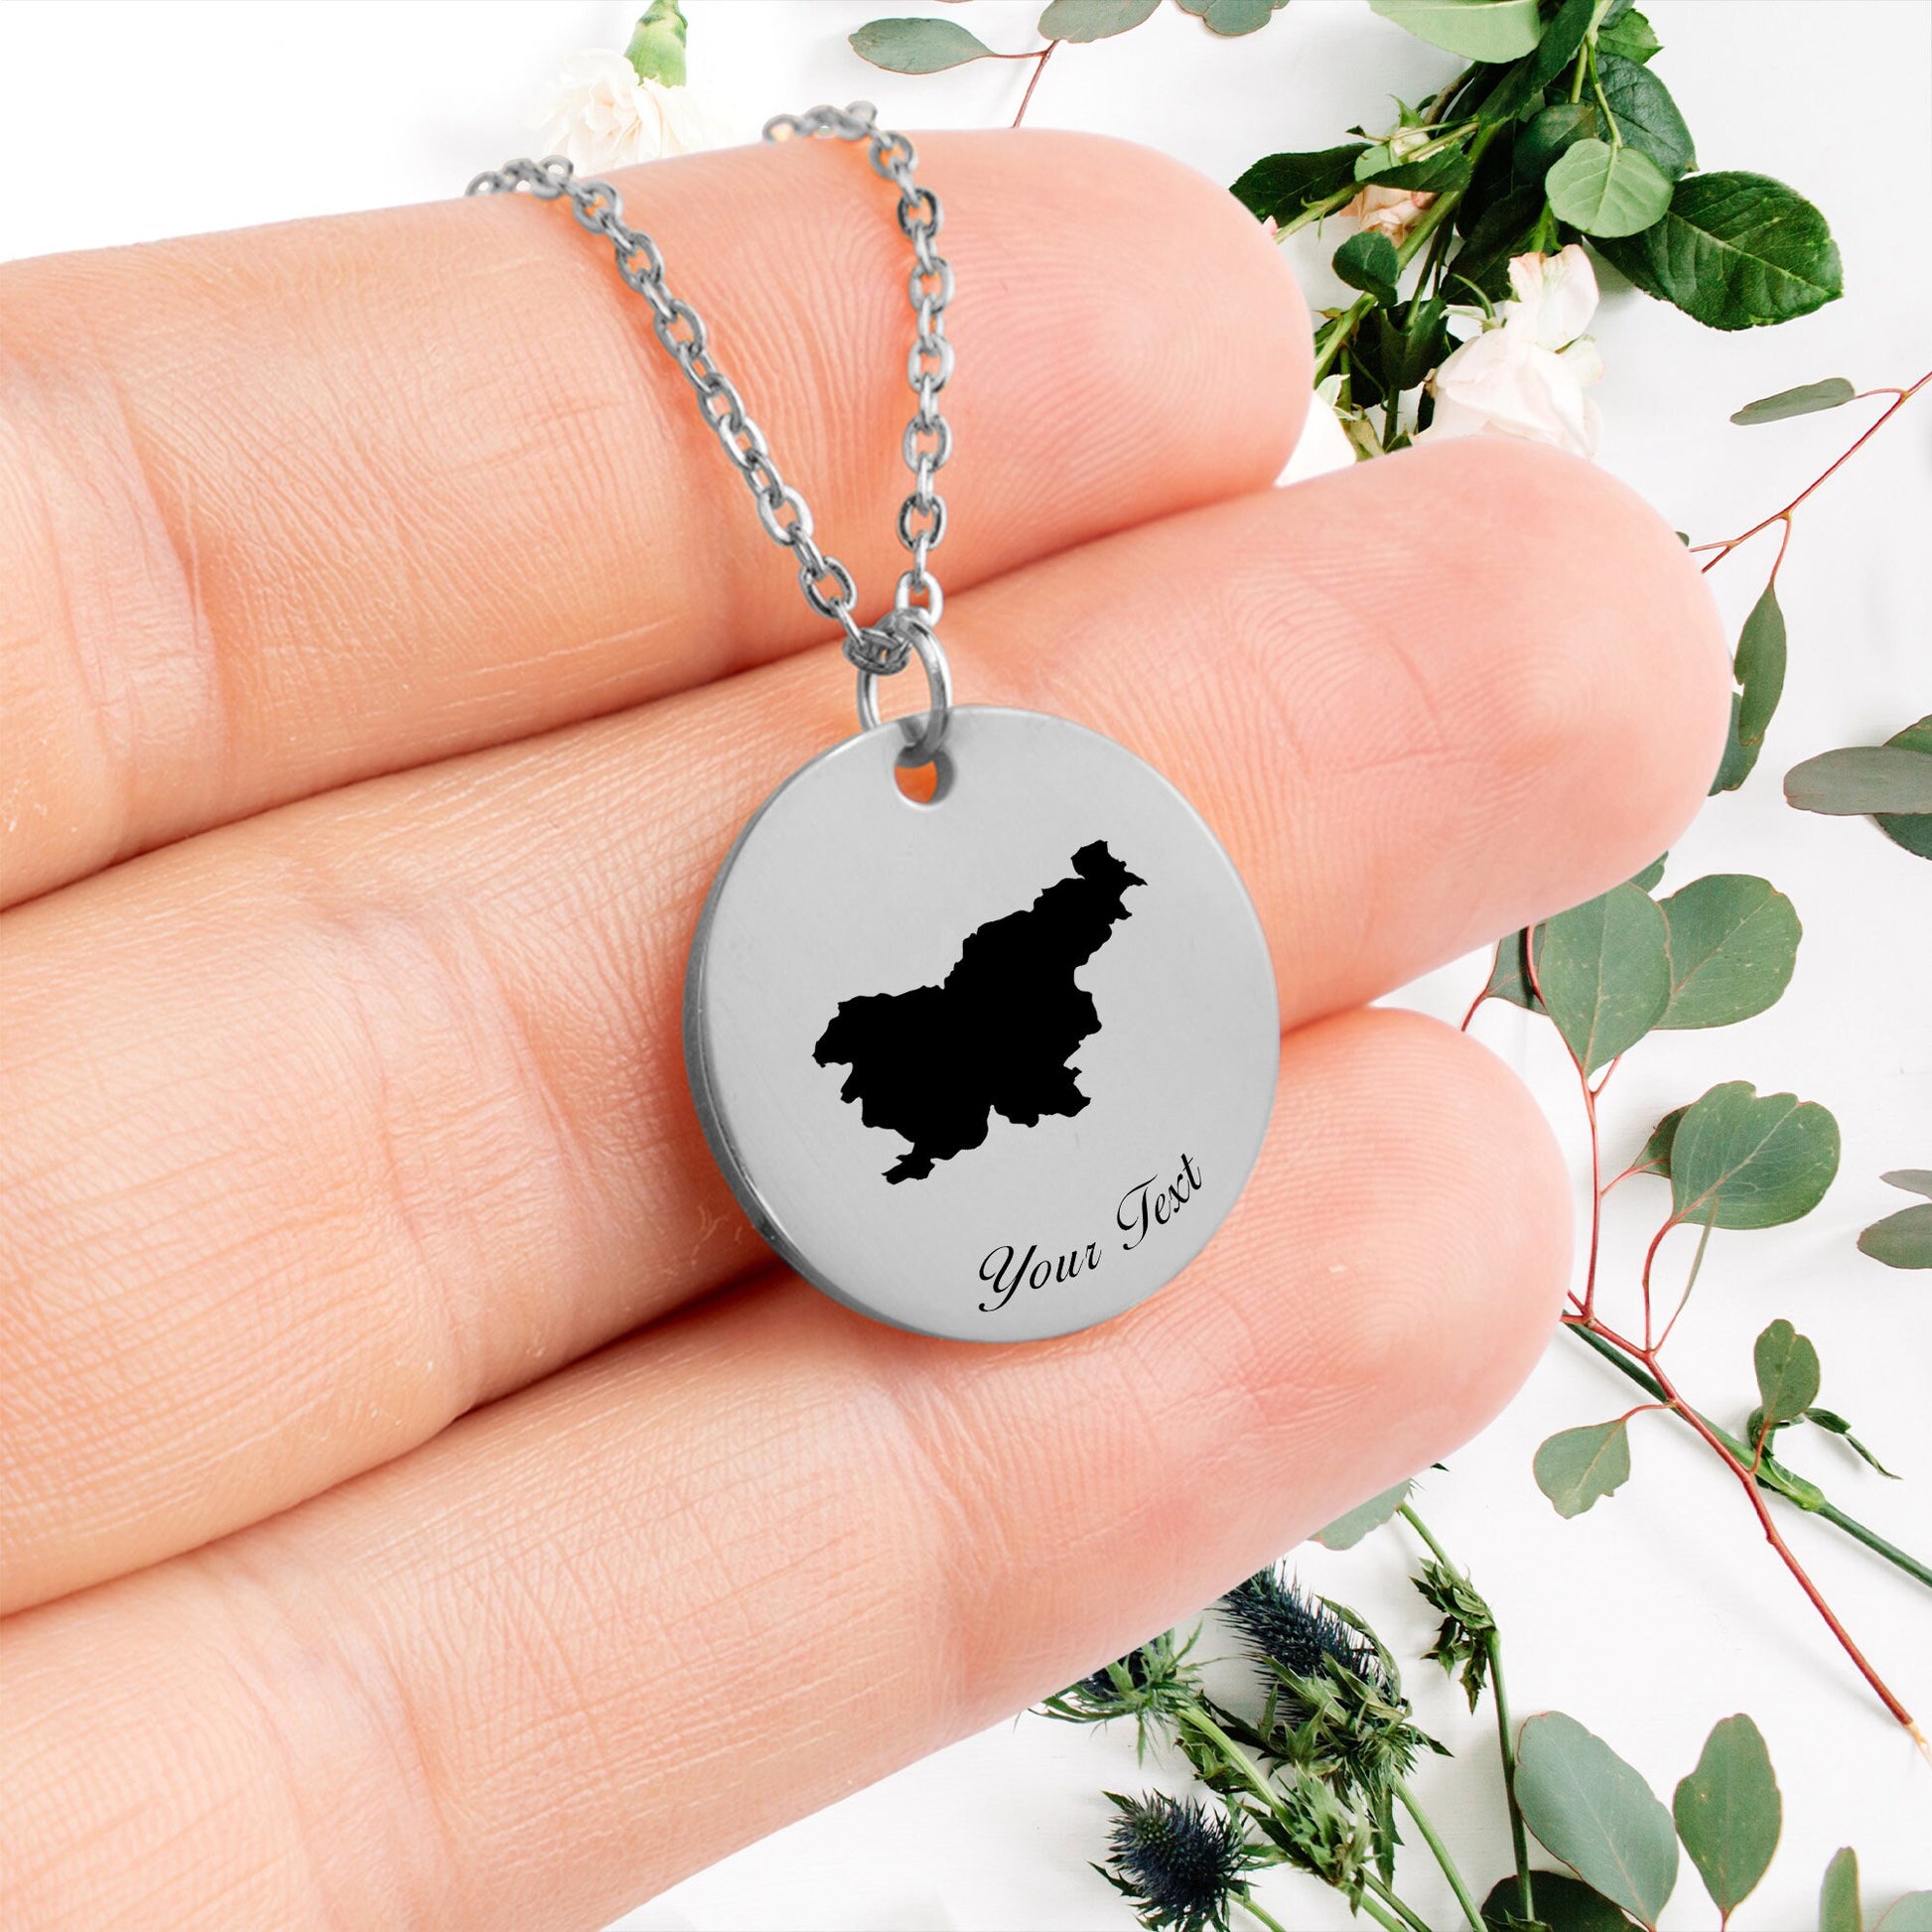 Slovenia Country Map Necklace, Your Name Necklace, Minimalist Necklace, Personalized Gift, Silver Necklace, Gift For Him Her